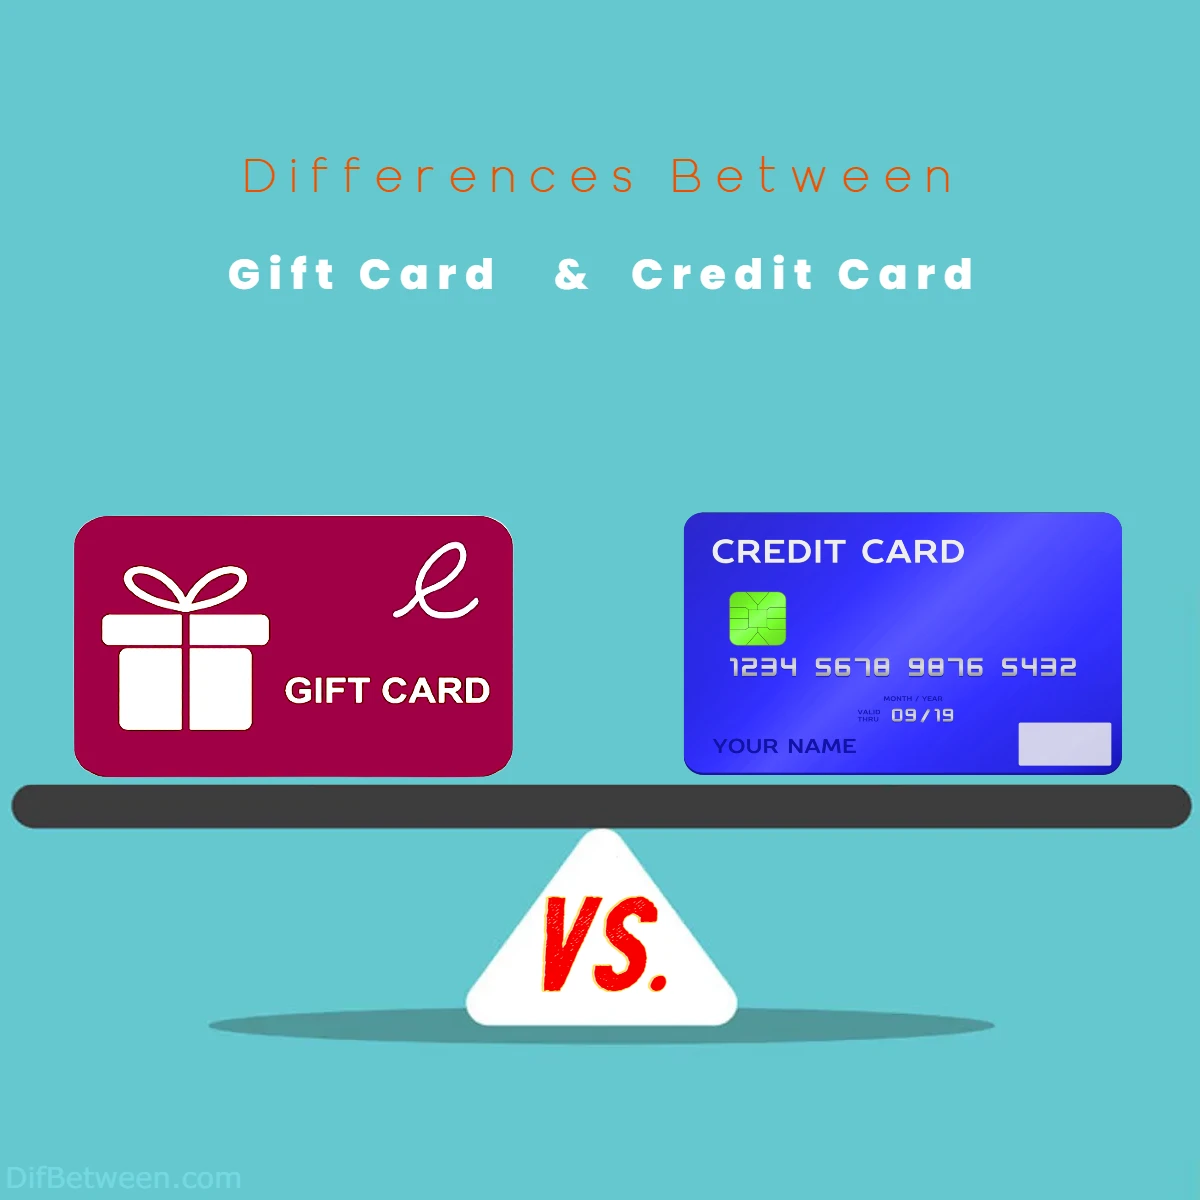 Differences Between Gift Card vs Credit Card